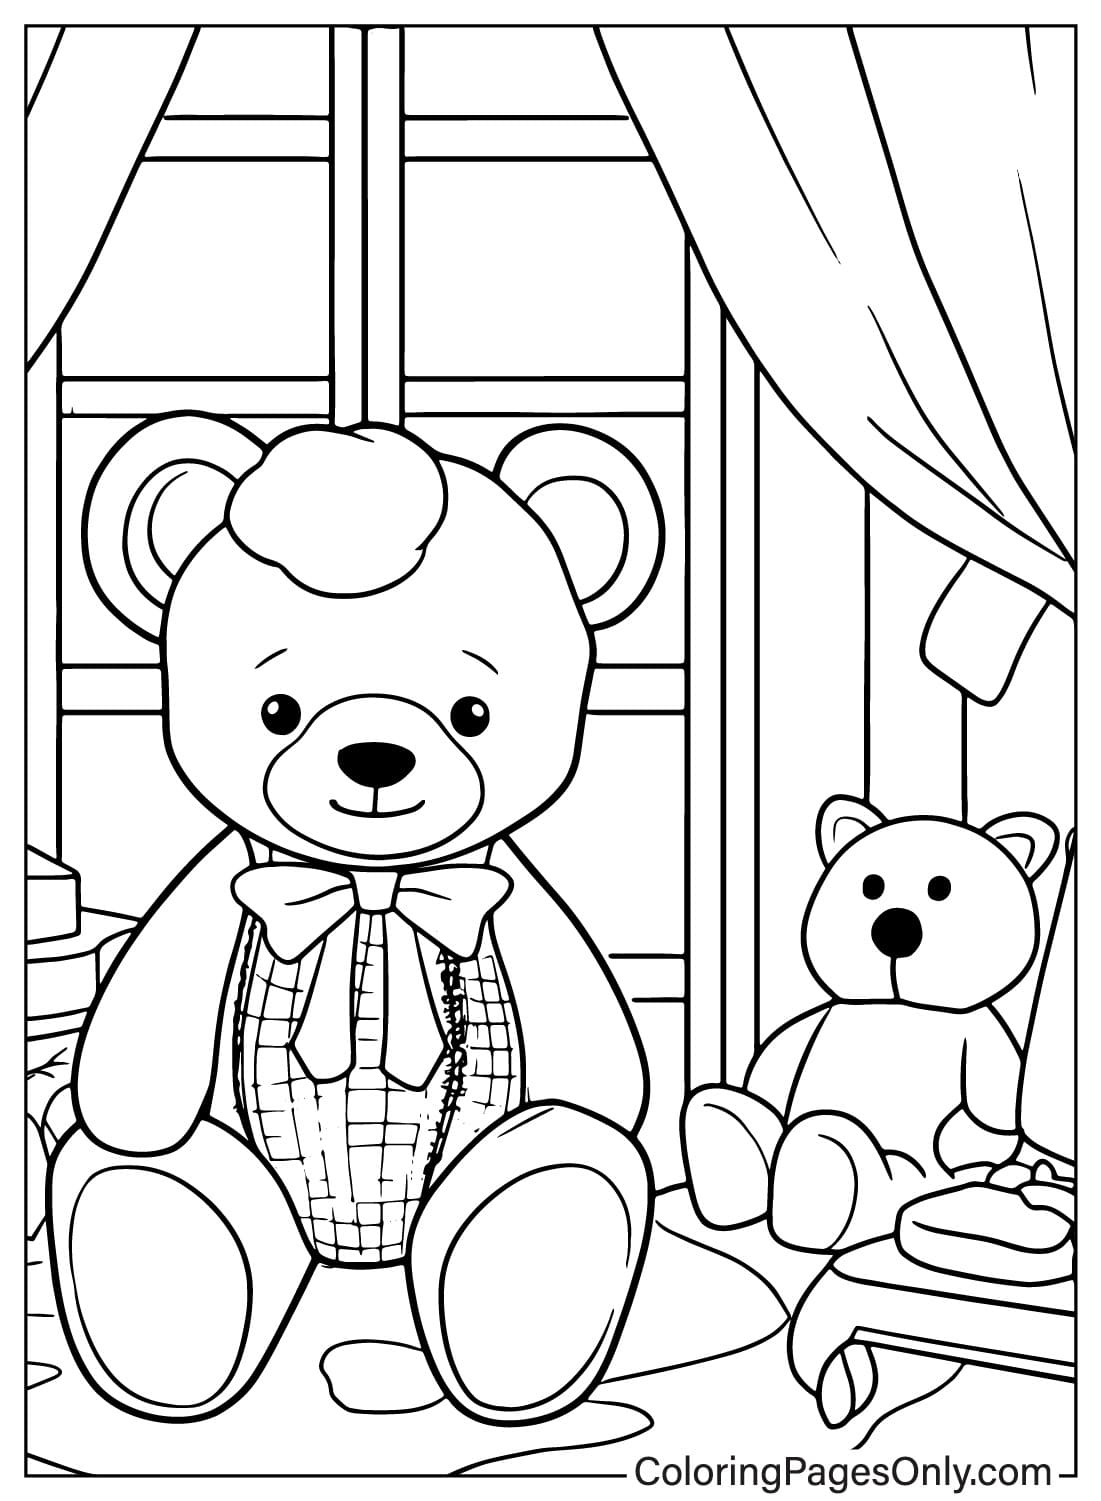 89 Free Printable Teddy Bear Coloring Pages